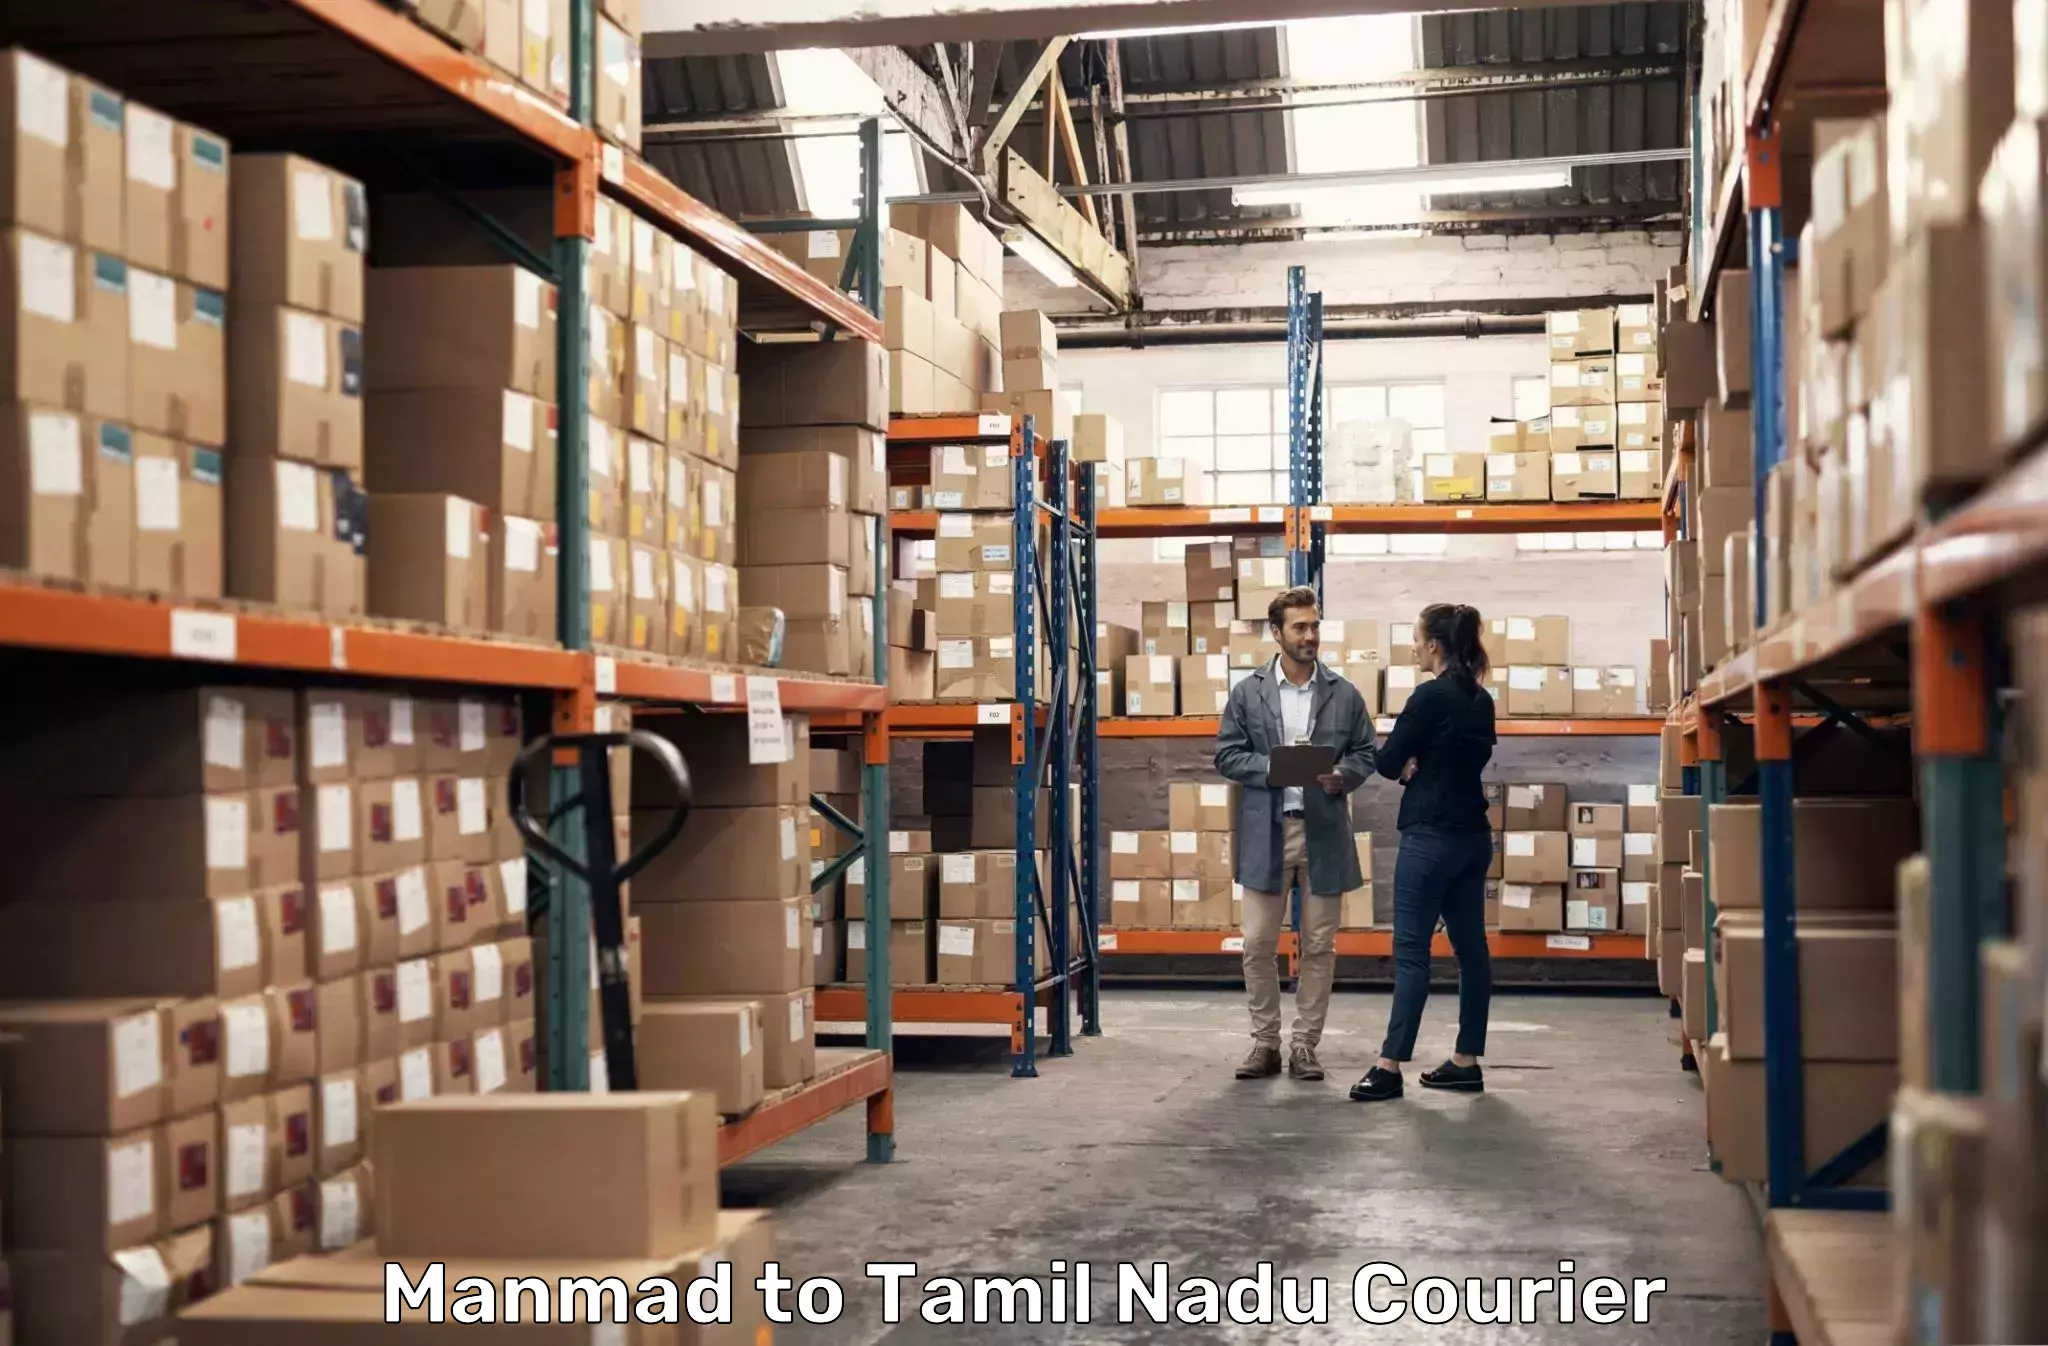 Advanced courier platforms Manmad to Thoppur